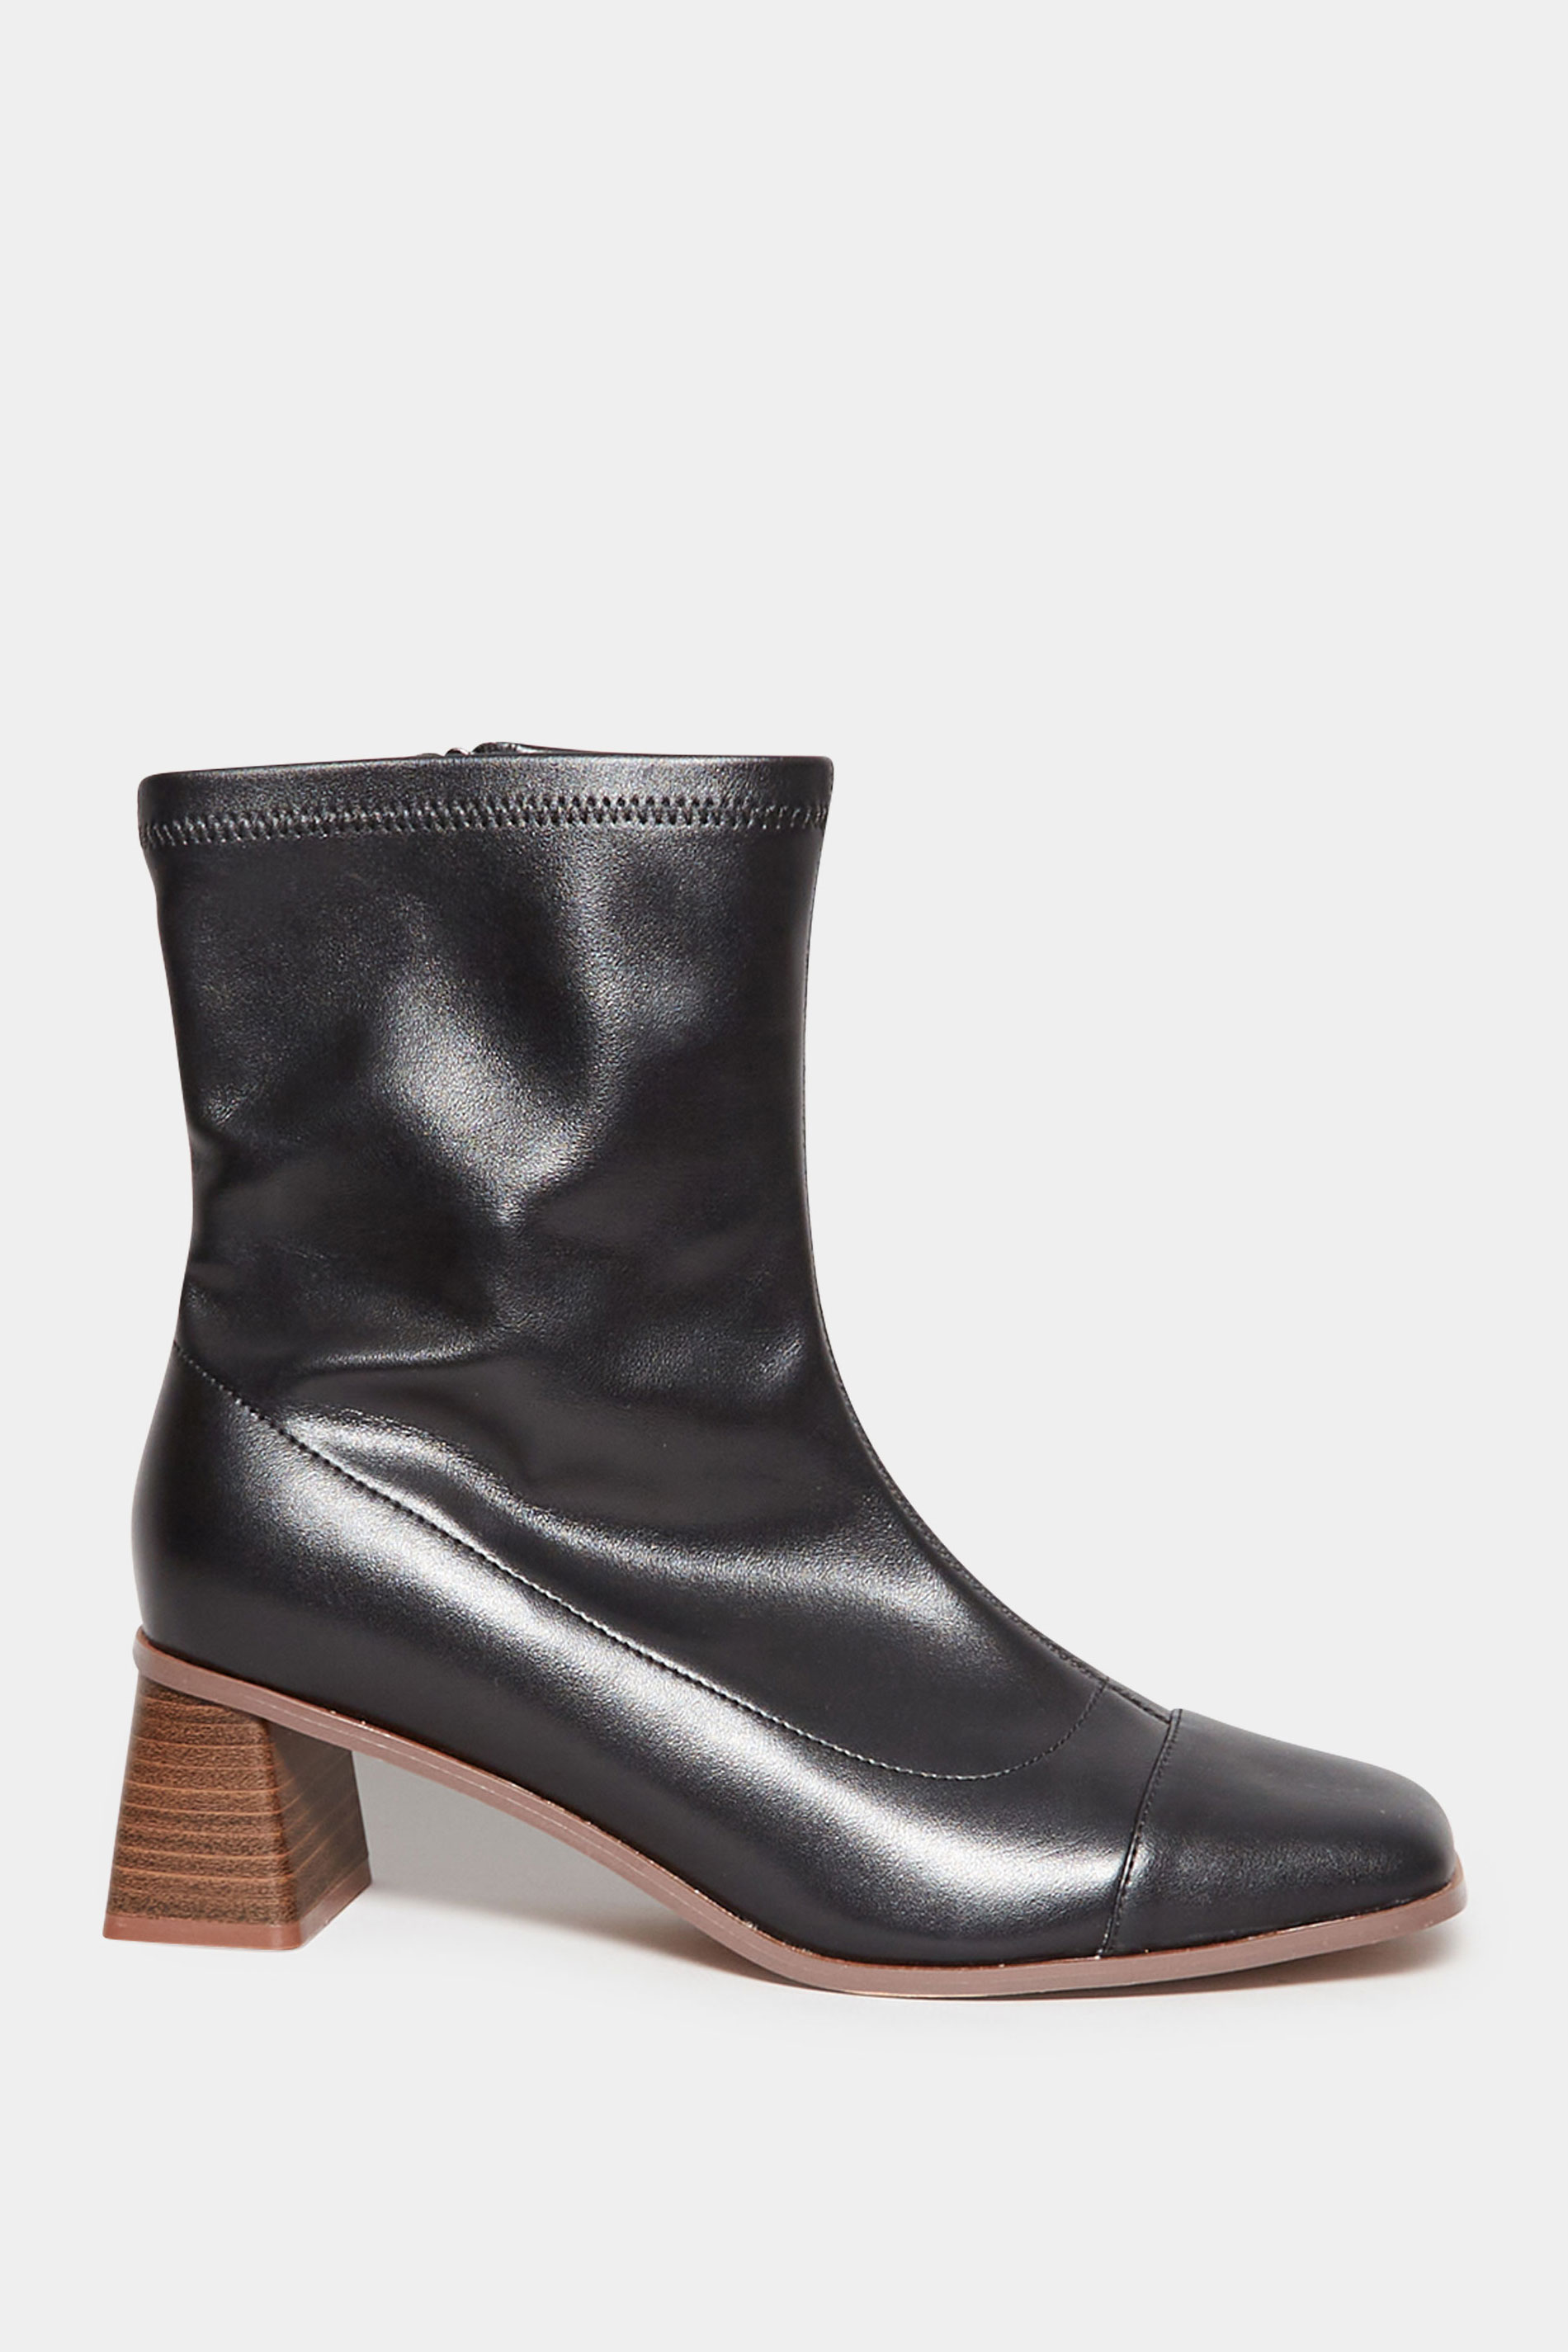 LIMITED COLLECTION Black Square Toe Block Heel Boots In Extra Wide EEE Fit | Yours Clothing 3